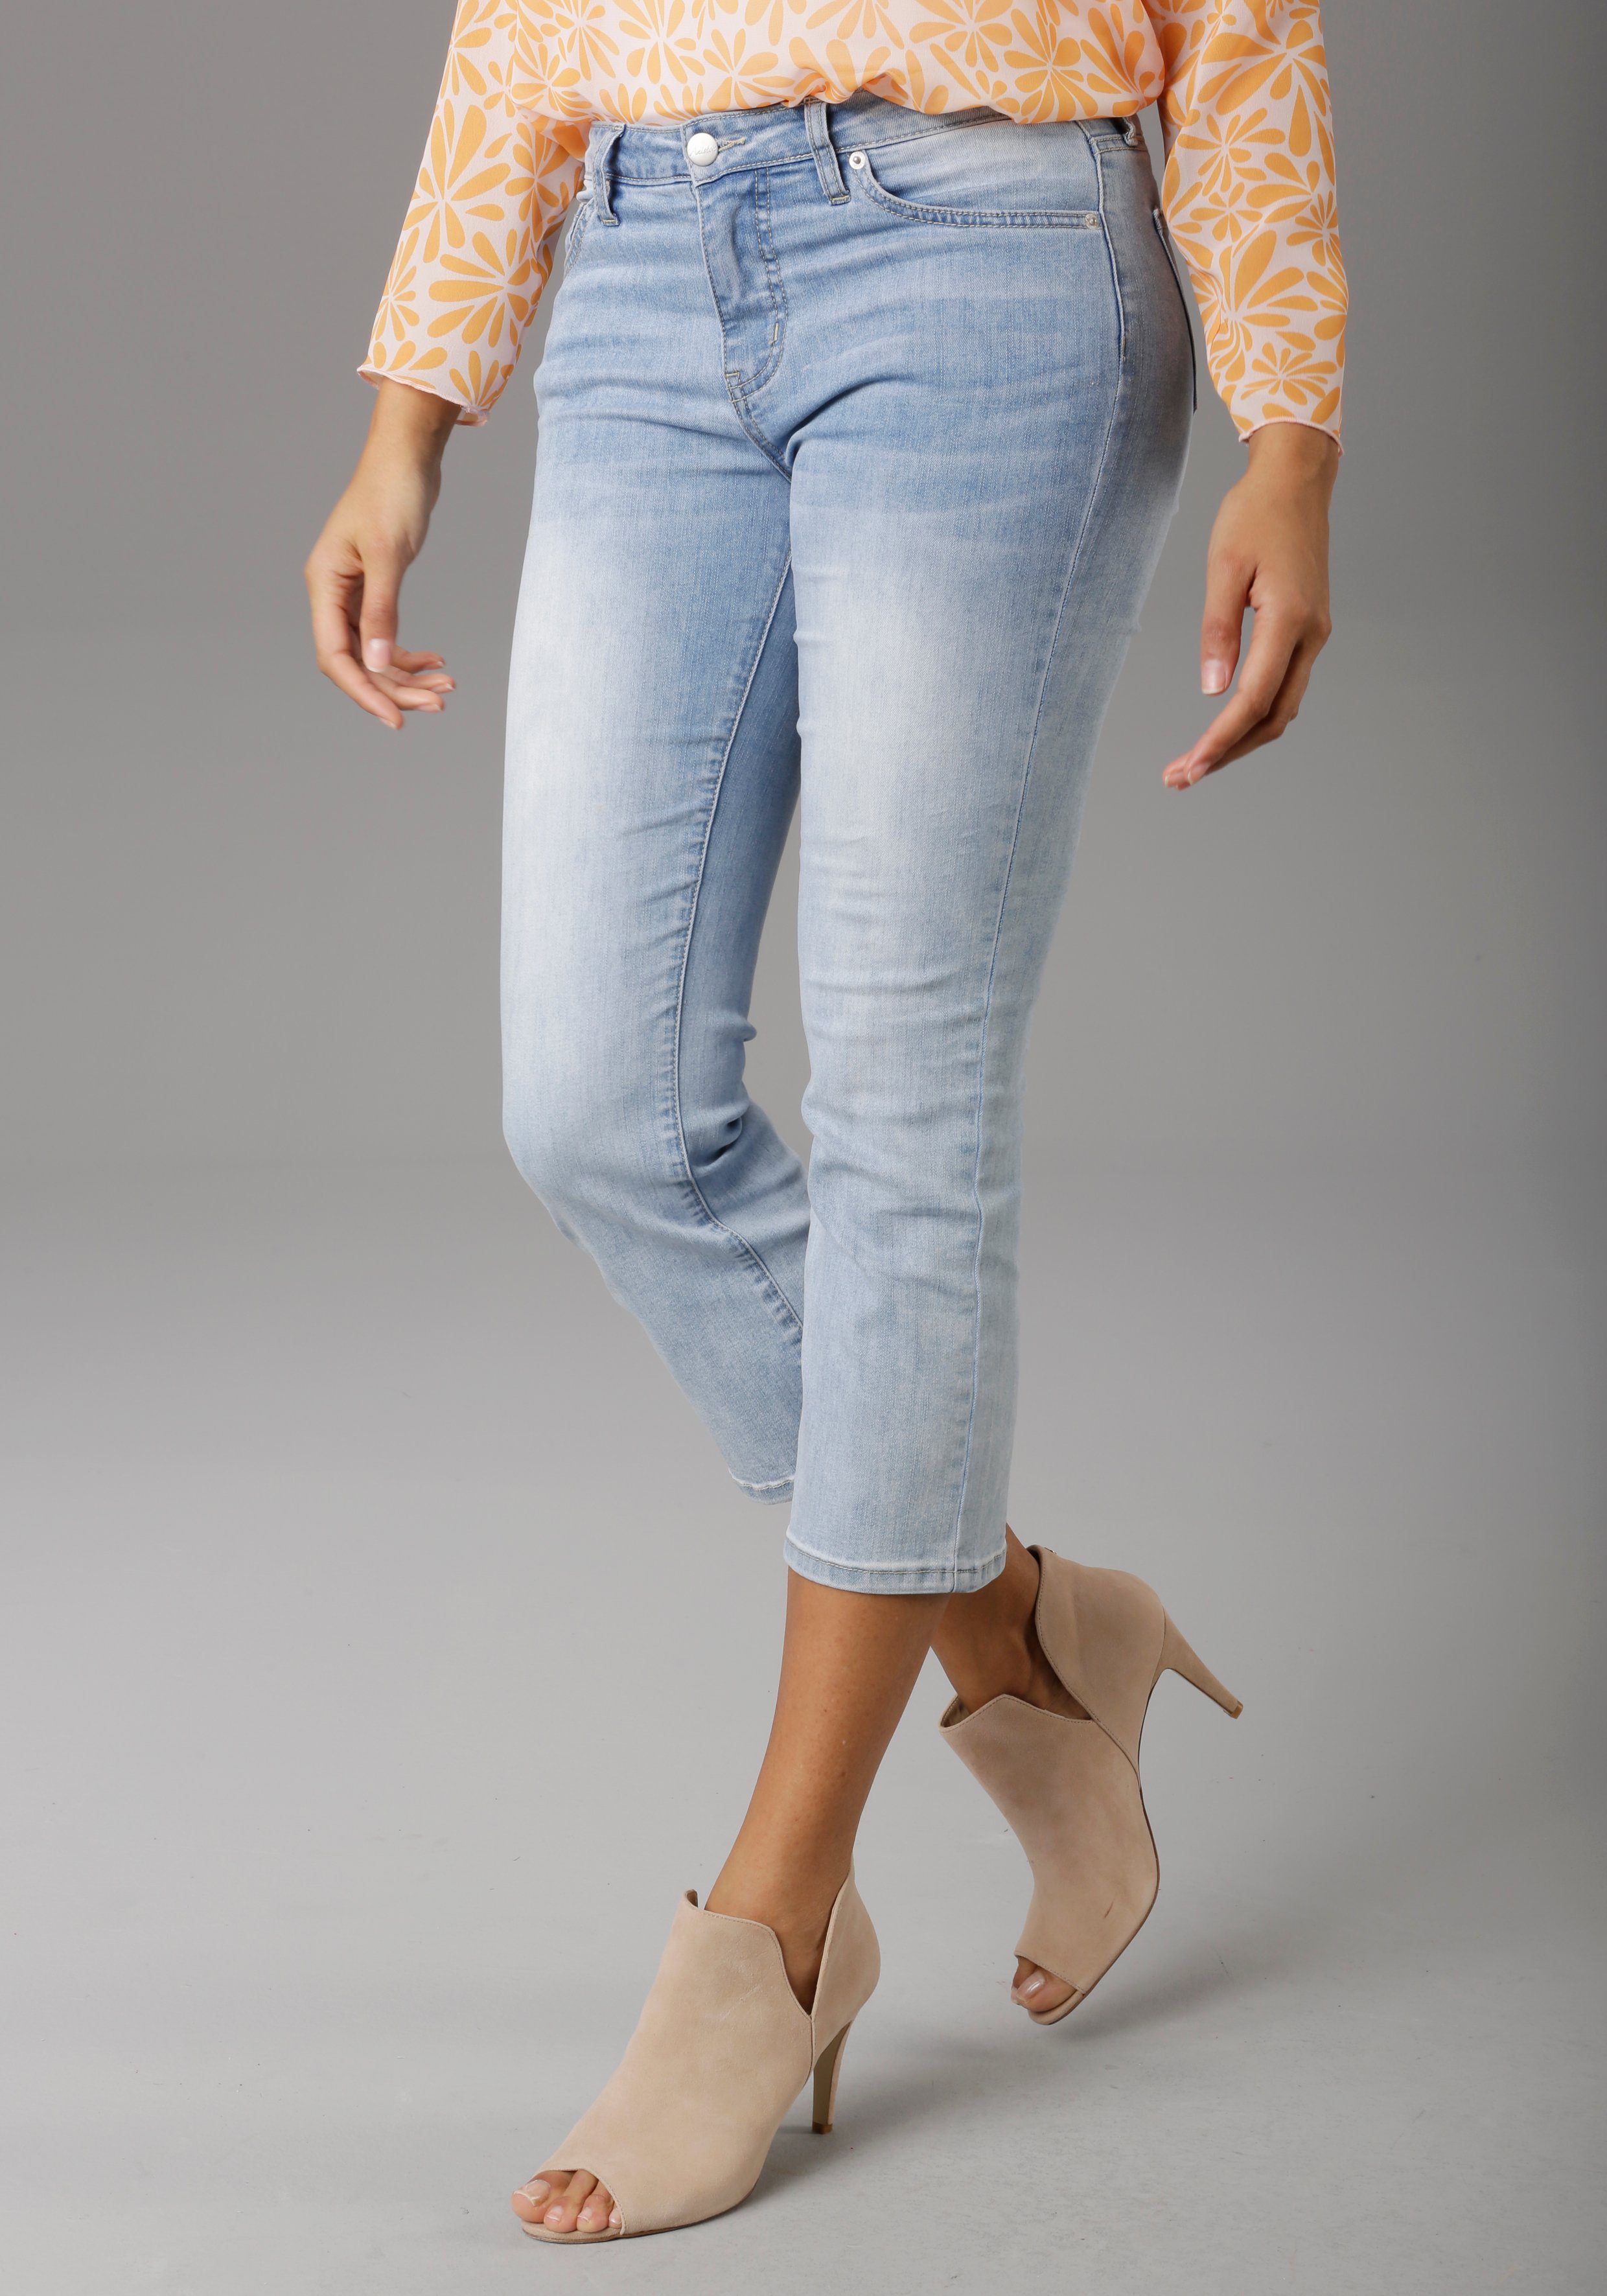 Aniston SELECTED Straight-Jeans in verkürzter cropped Länge light-blue-washed | Stretchjeans